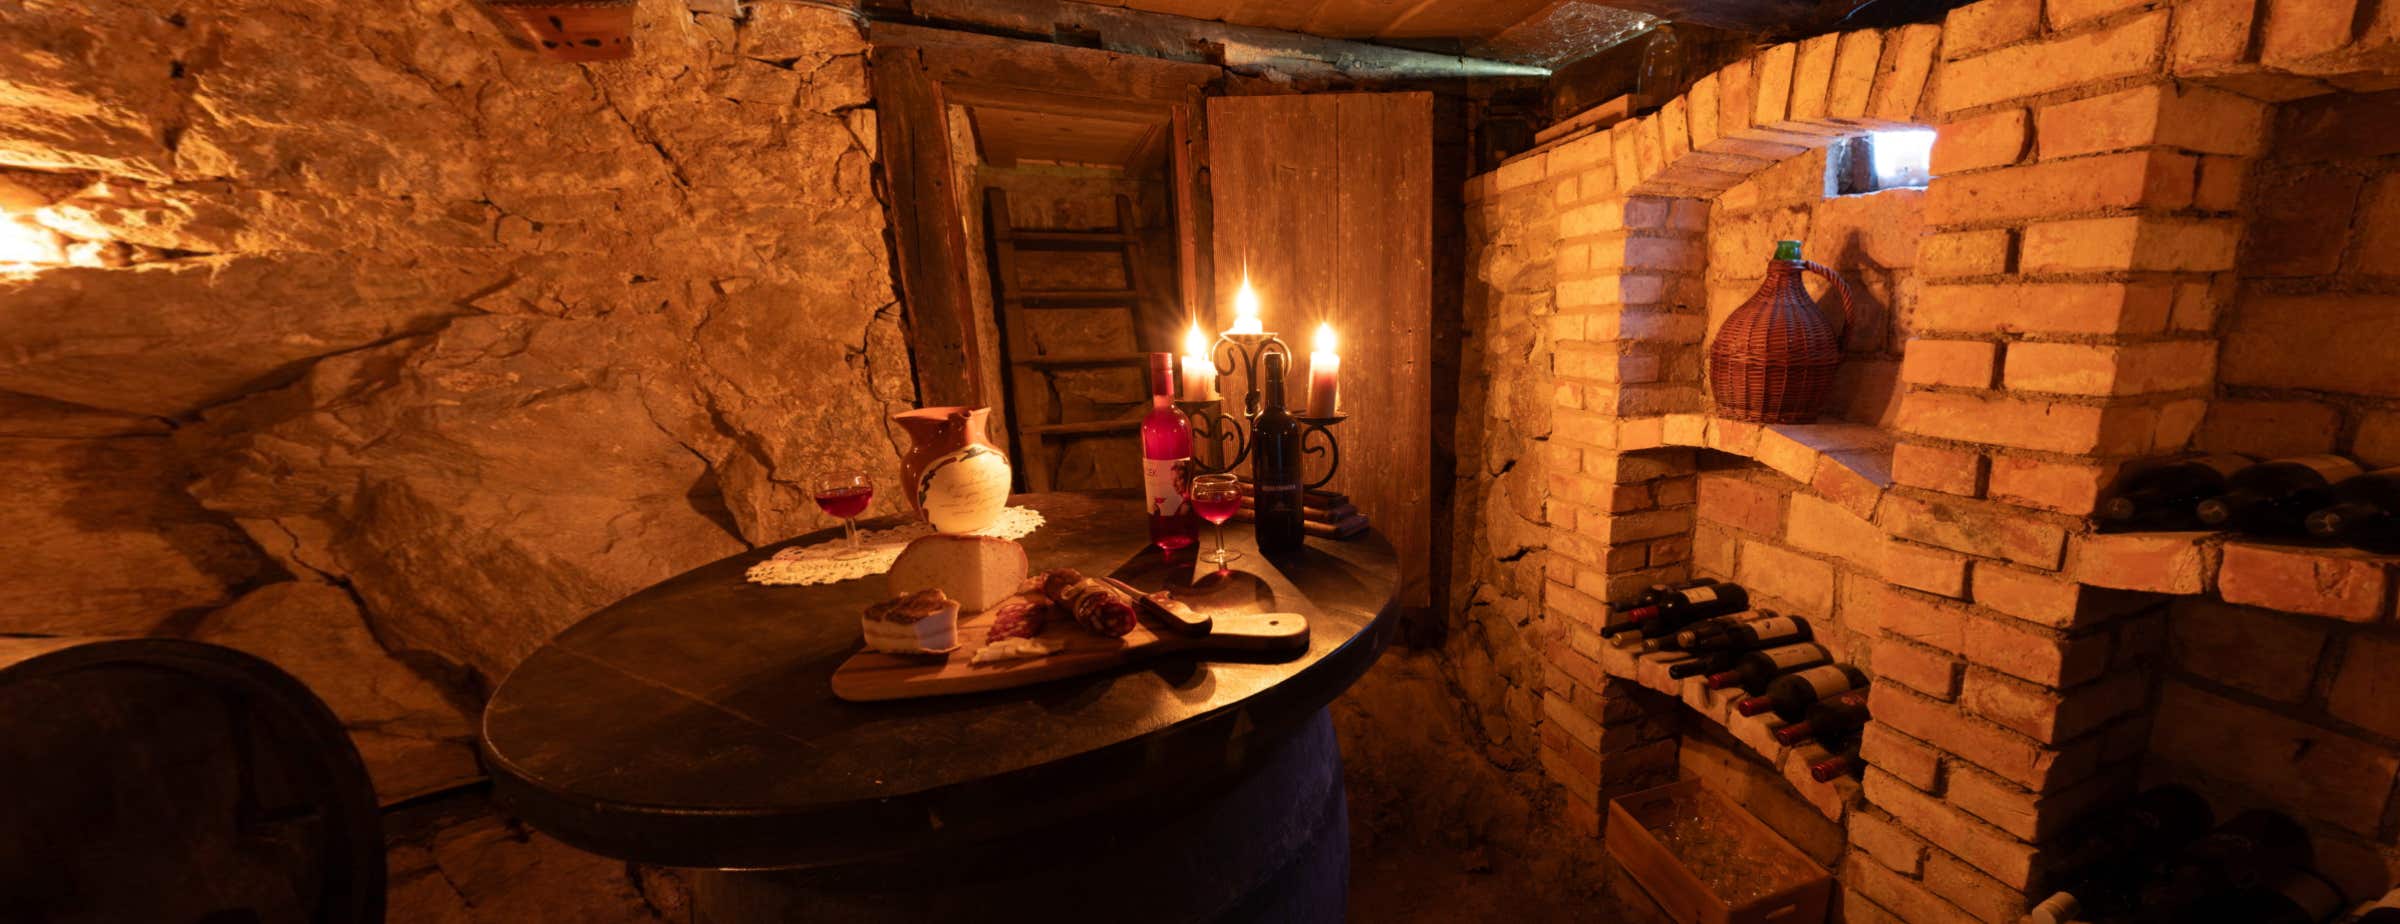 Image in wine cellar used for tastings. On a round table, wine, glassed, cheese, sausages and candles are decorated. On the right wall, stone shelfs are embedded into the wall and bottles of wine are lying on the shelfs.  